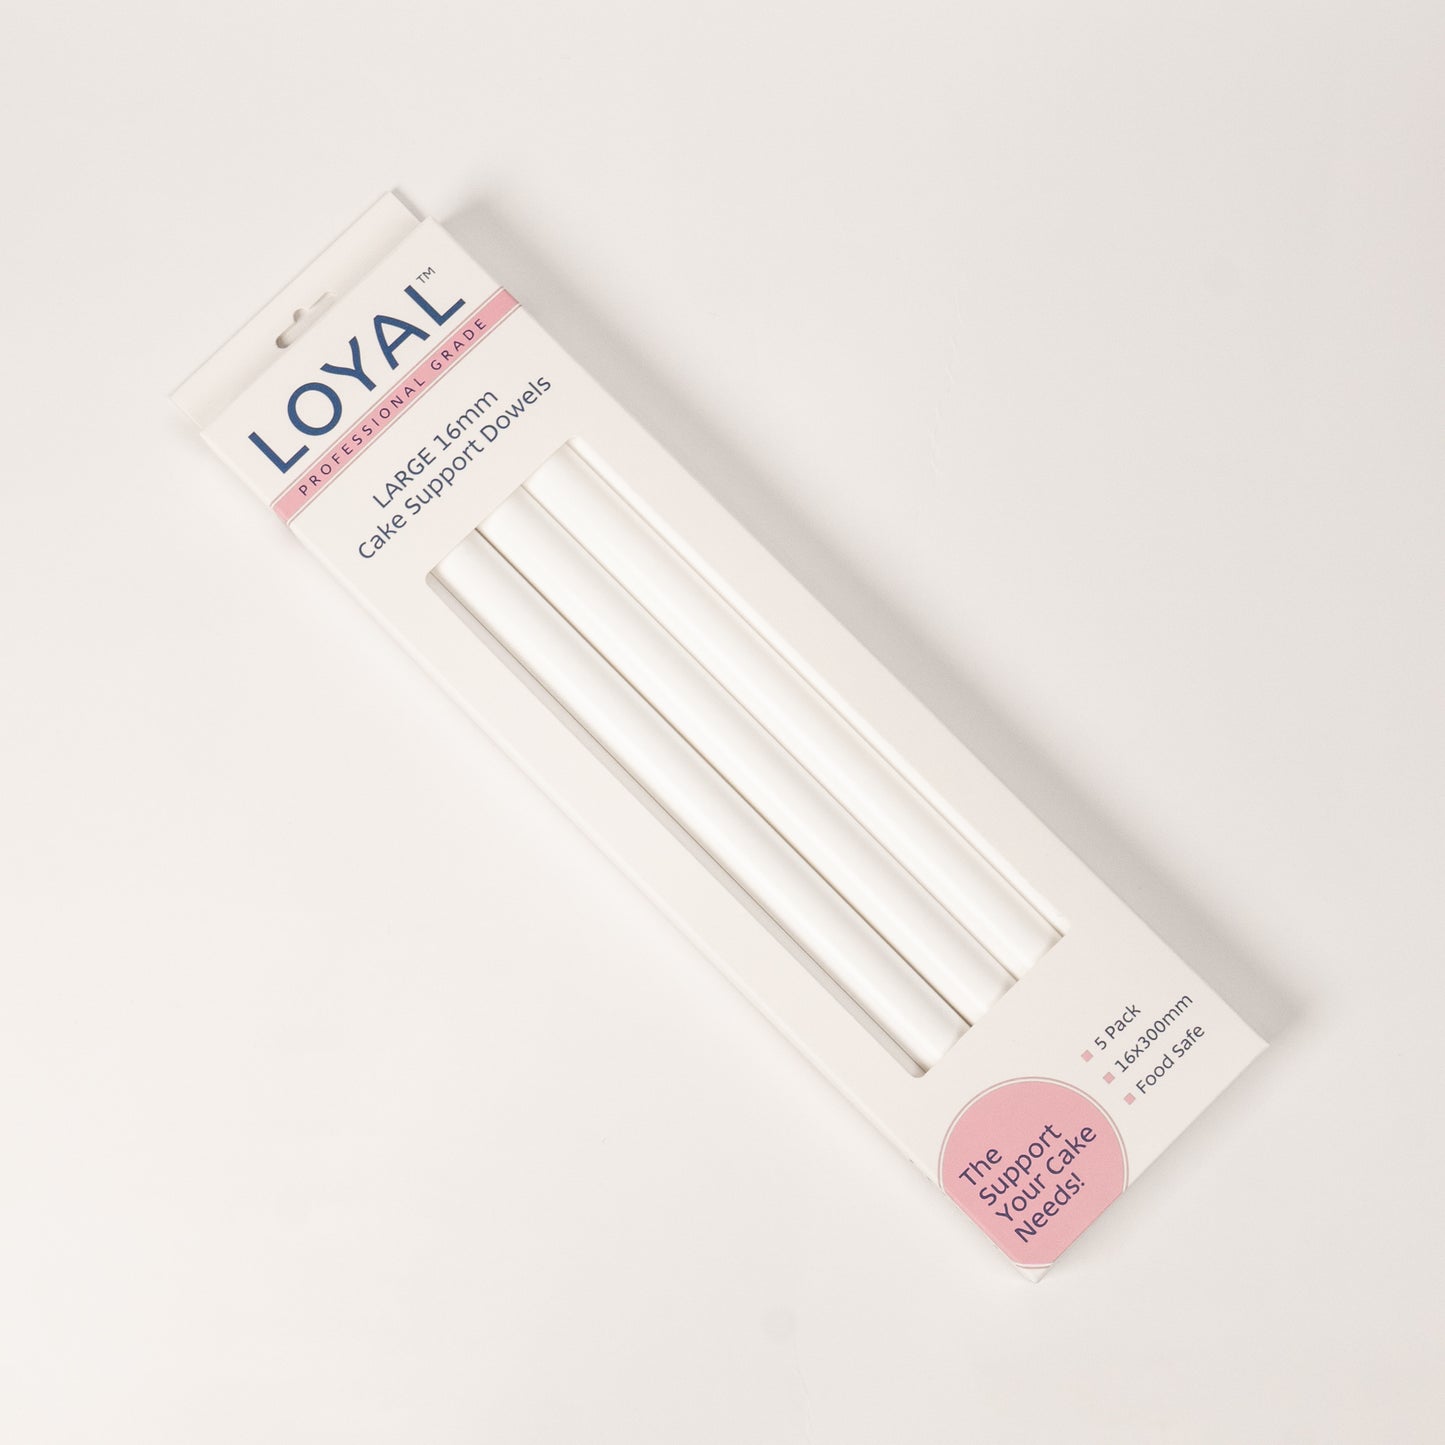 Loyal Cake Dowels Heavy Duty Small and Large